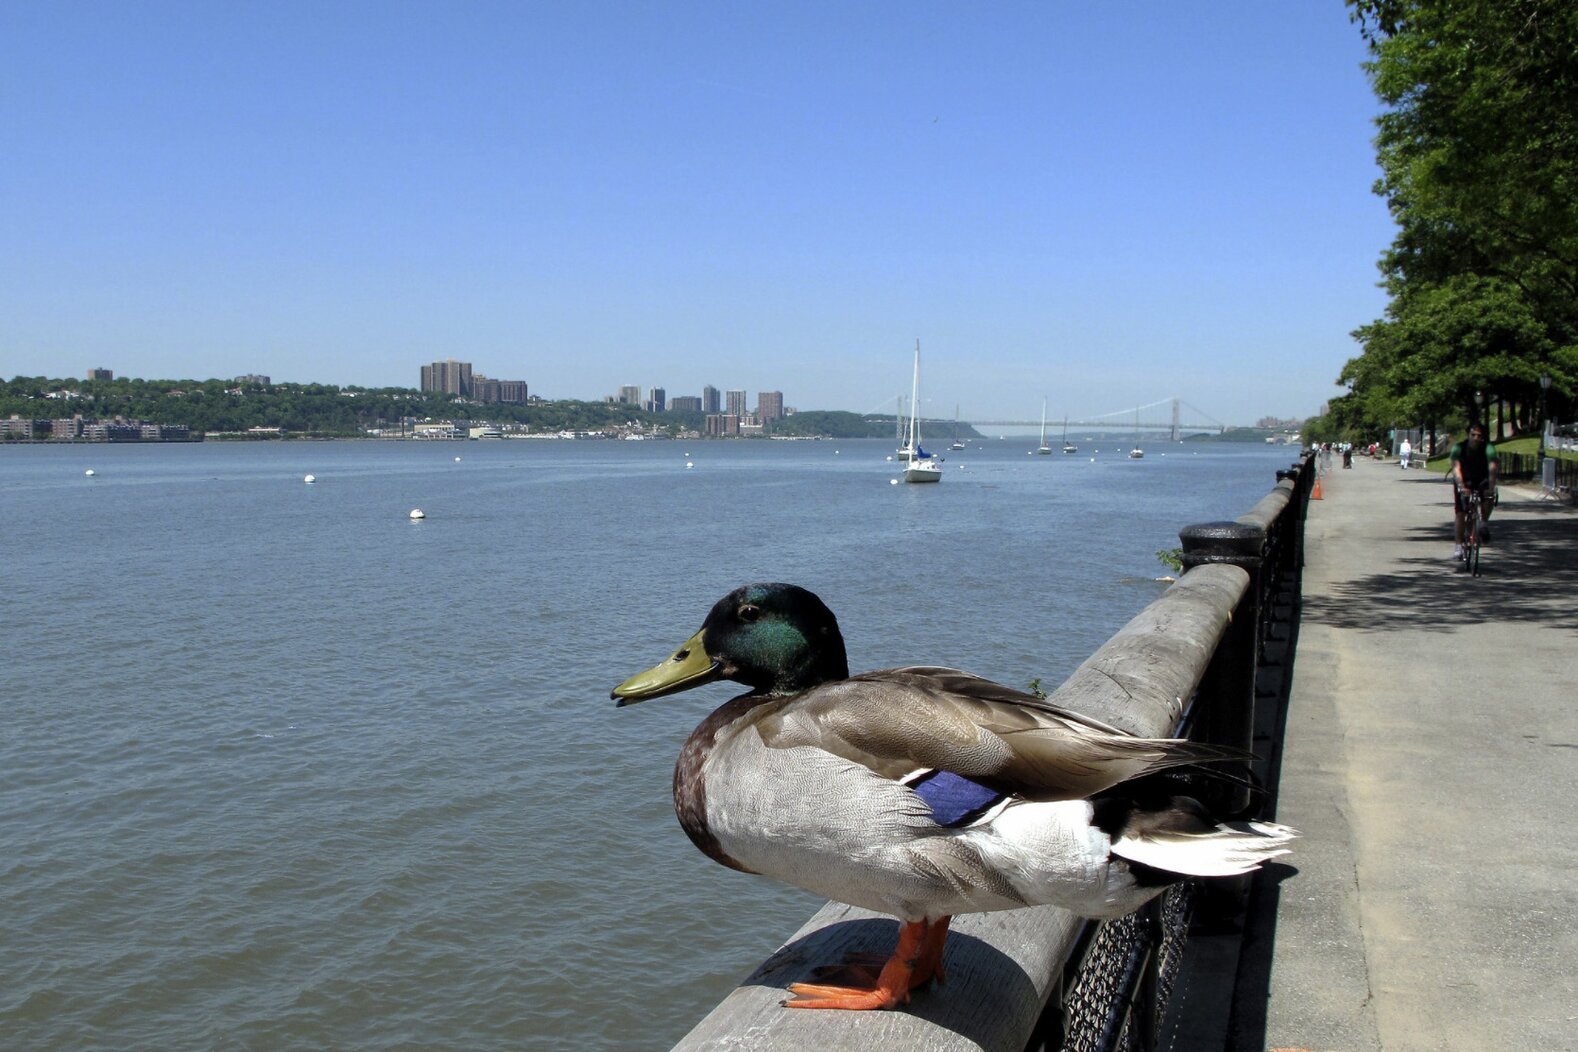 A male Mallard rests in Riverside Park, which is known for migrating songbirds as well as waterbirds. Photo: <a href="https://www.flickr.com/photos/edcnyc/" target="_blank">Eddie Crimmins</a>